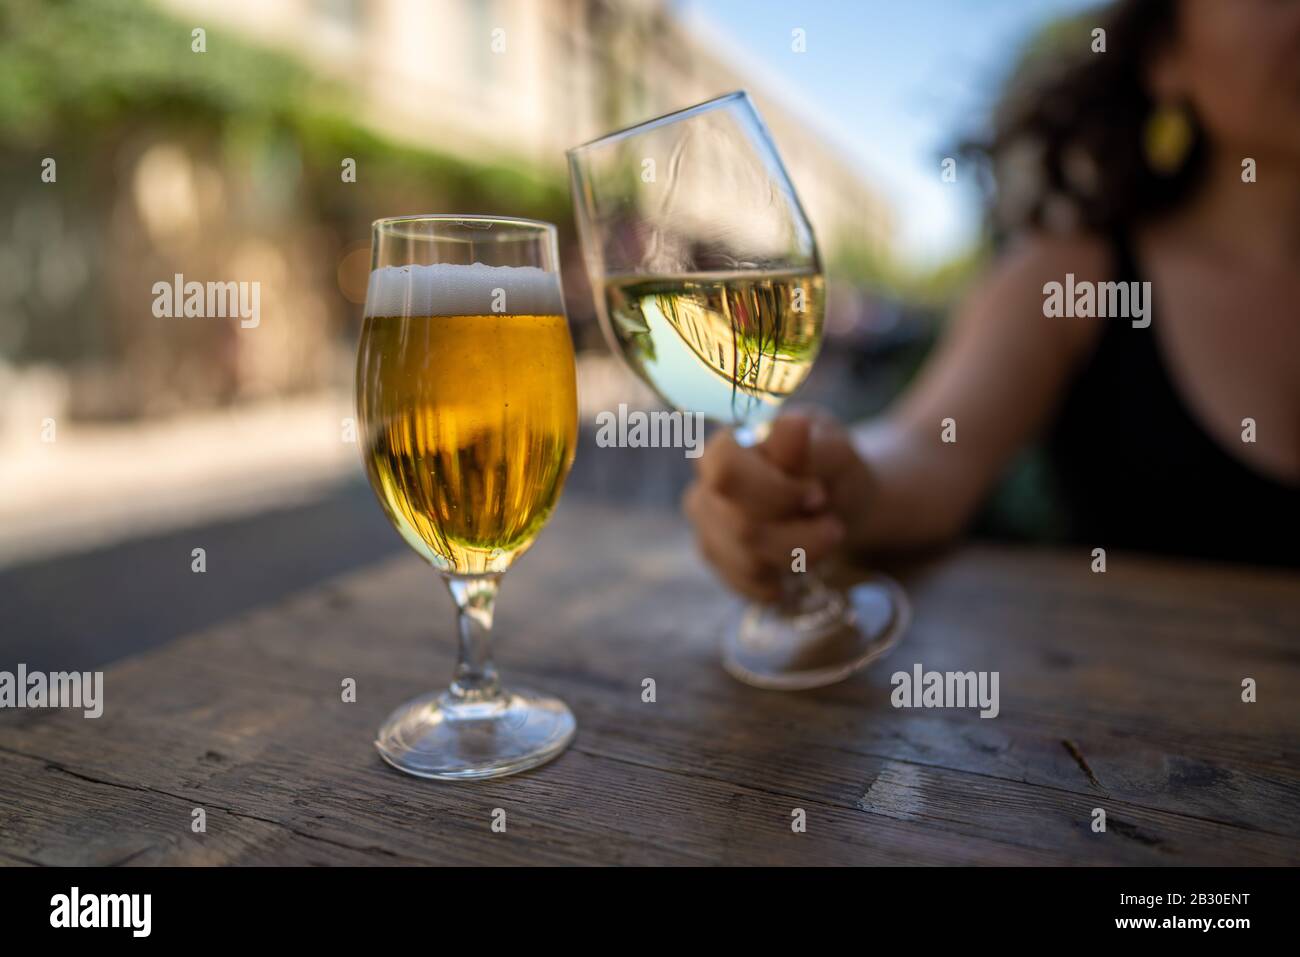 Women holding wine glass next to filled beer glass at outdoor table Stock Photo